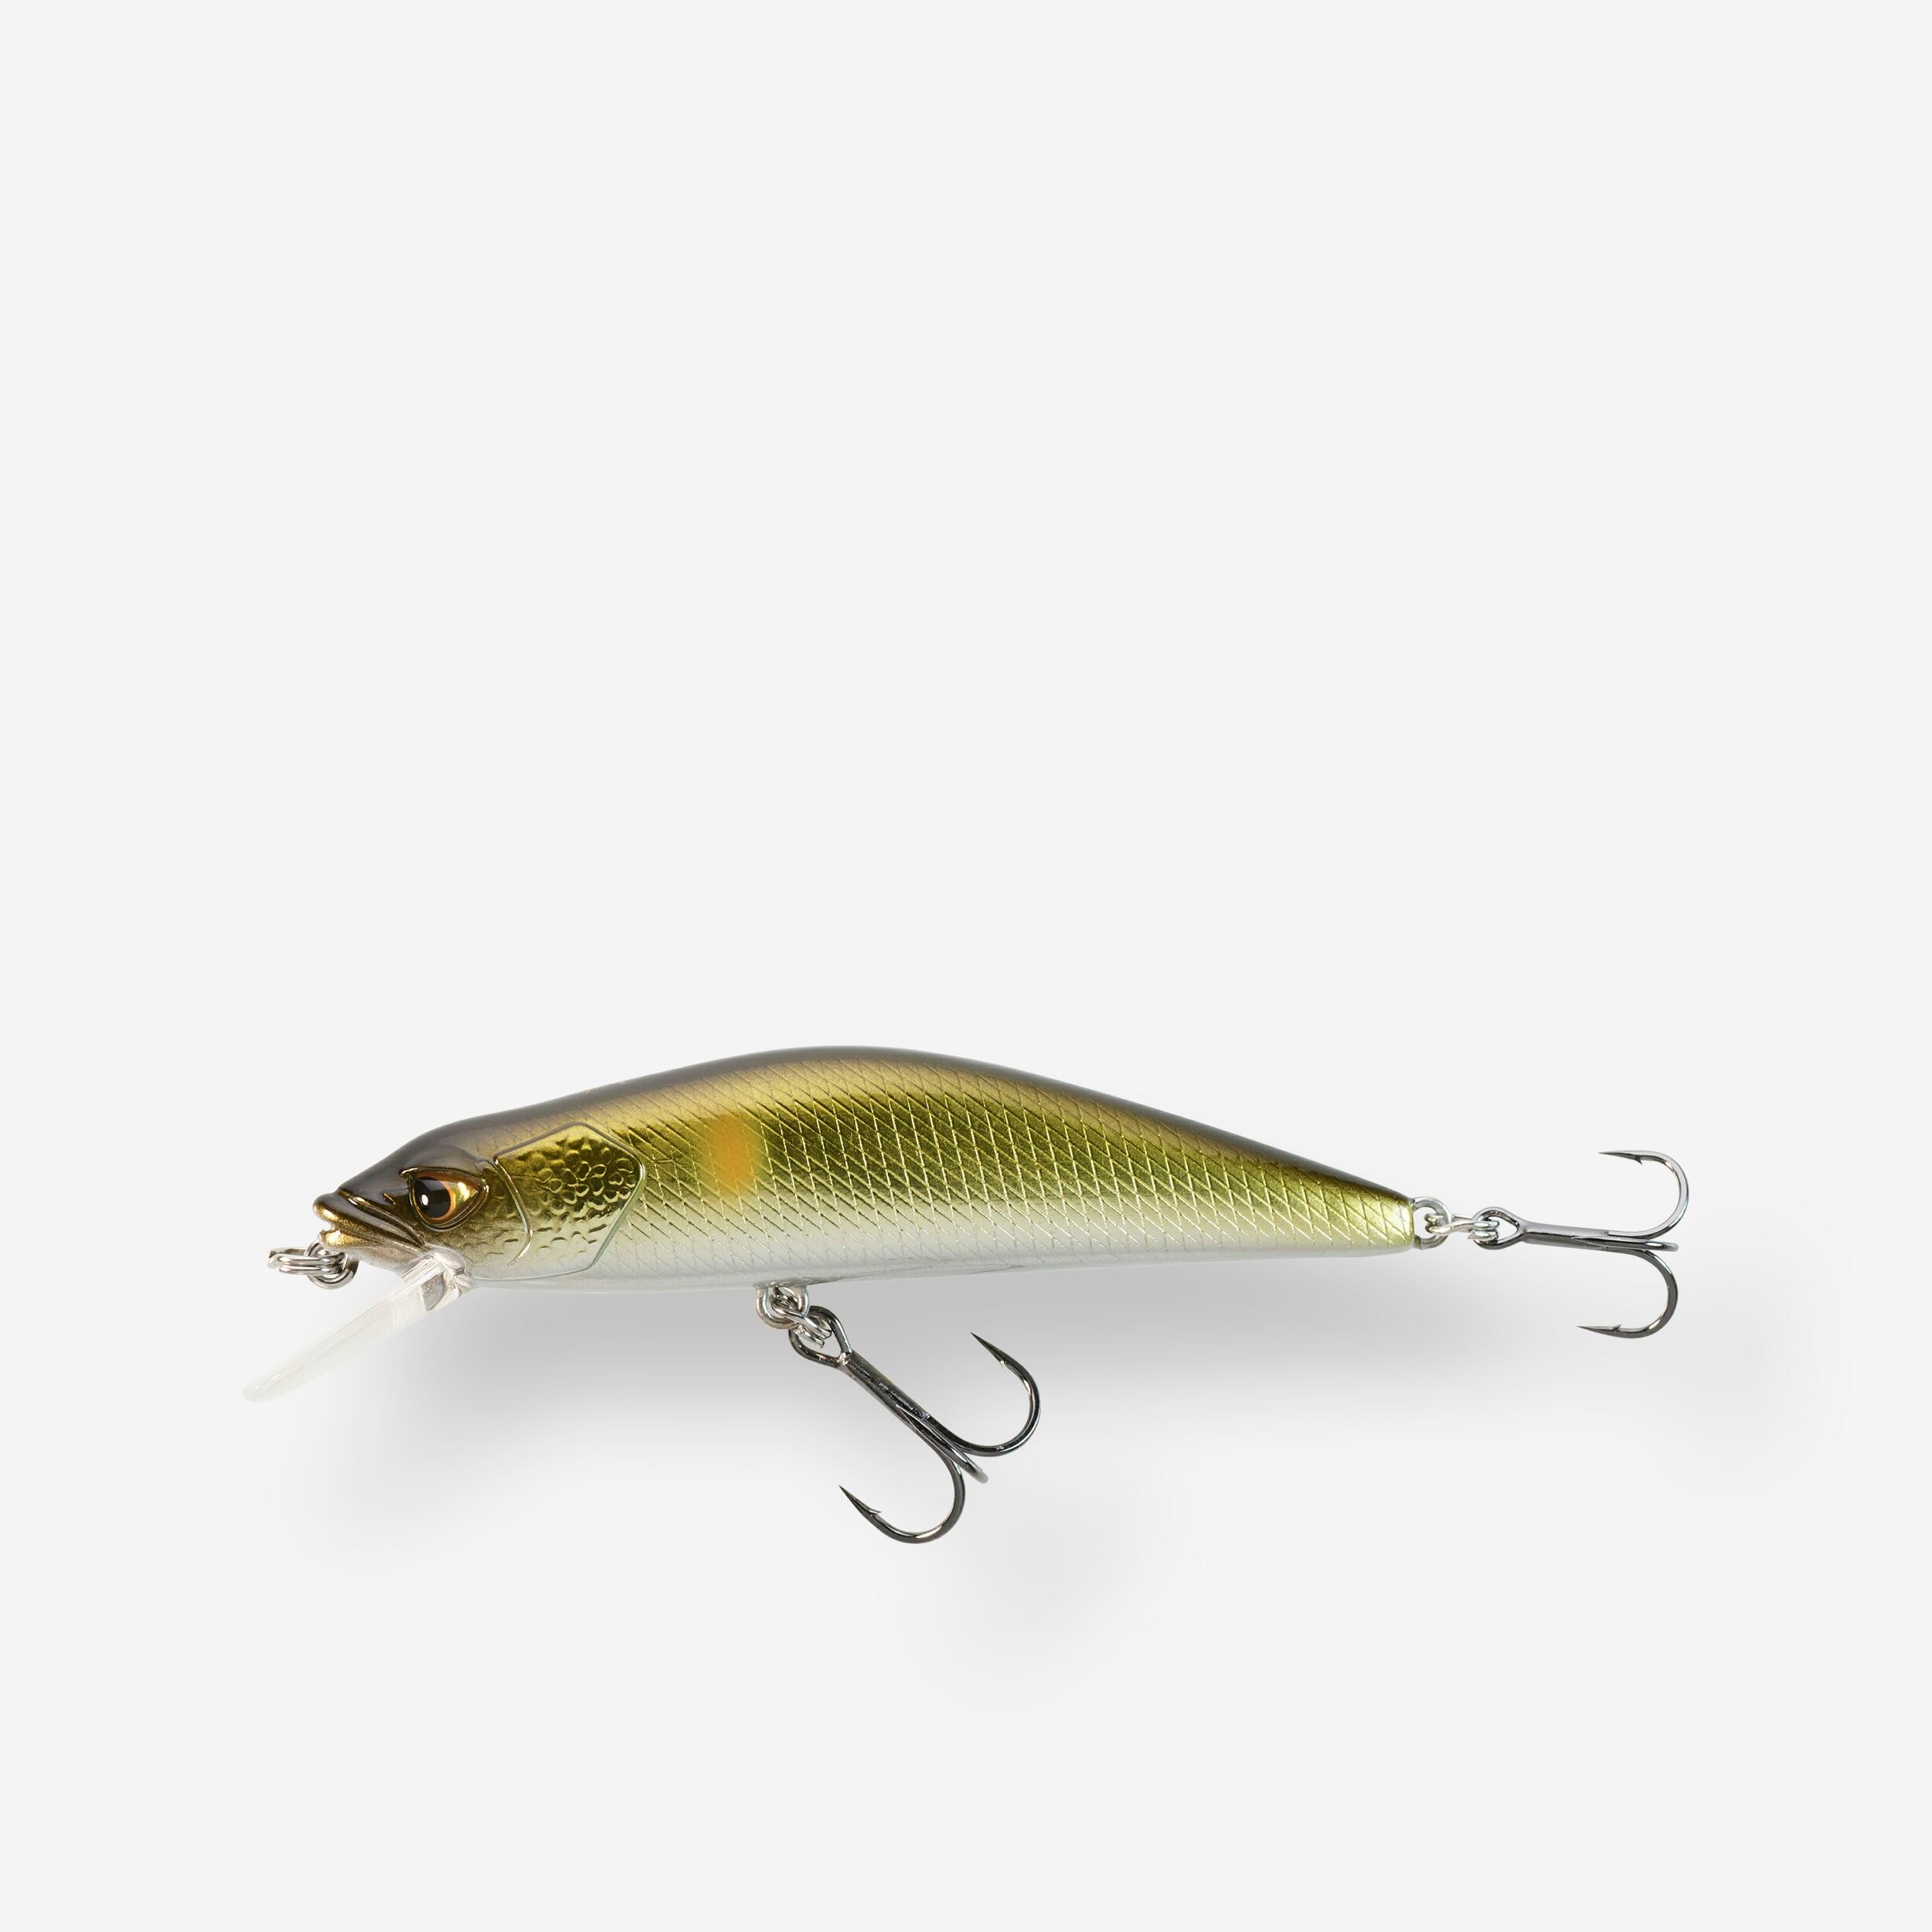 CAPERLAN MINNOW HARD LURE FOR TROUT WXM MNWFS US 85 AYU